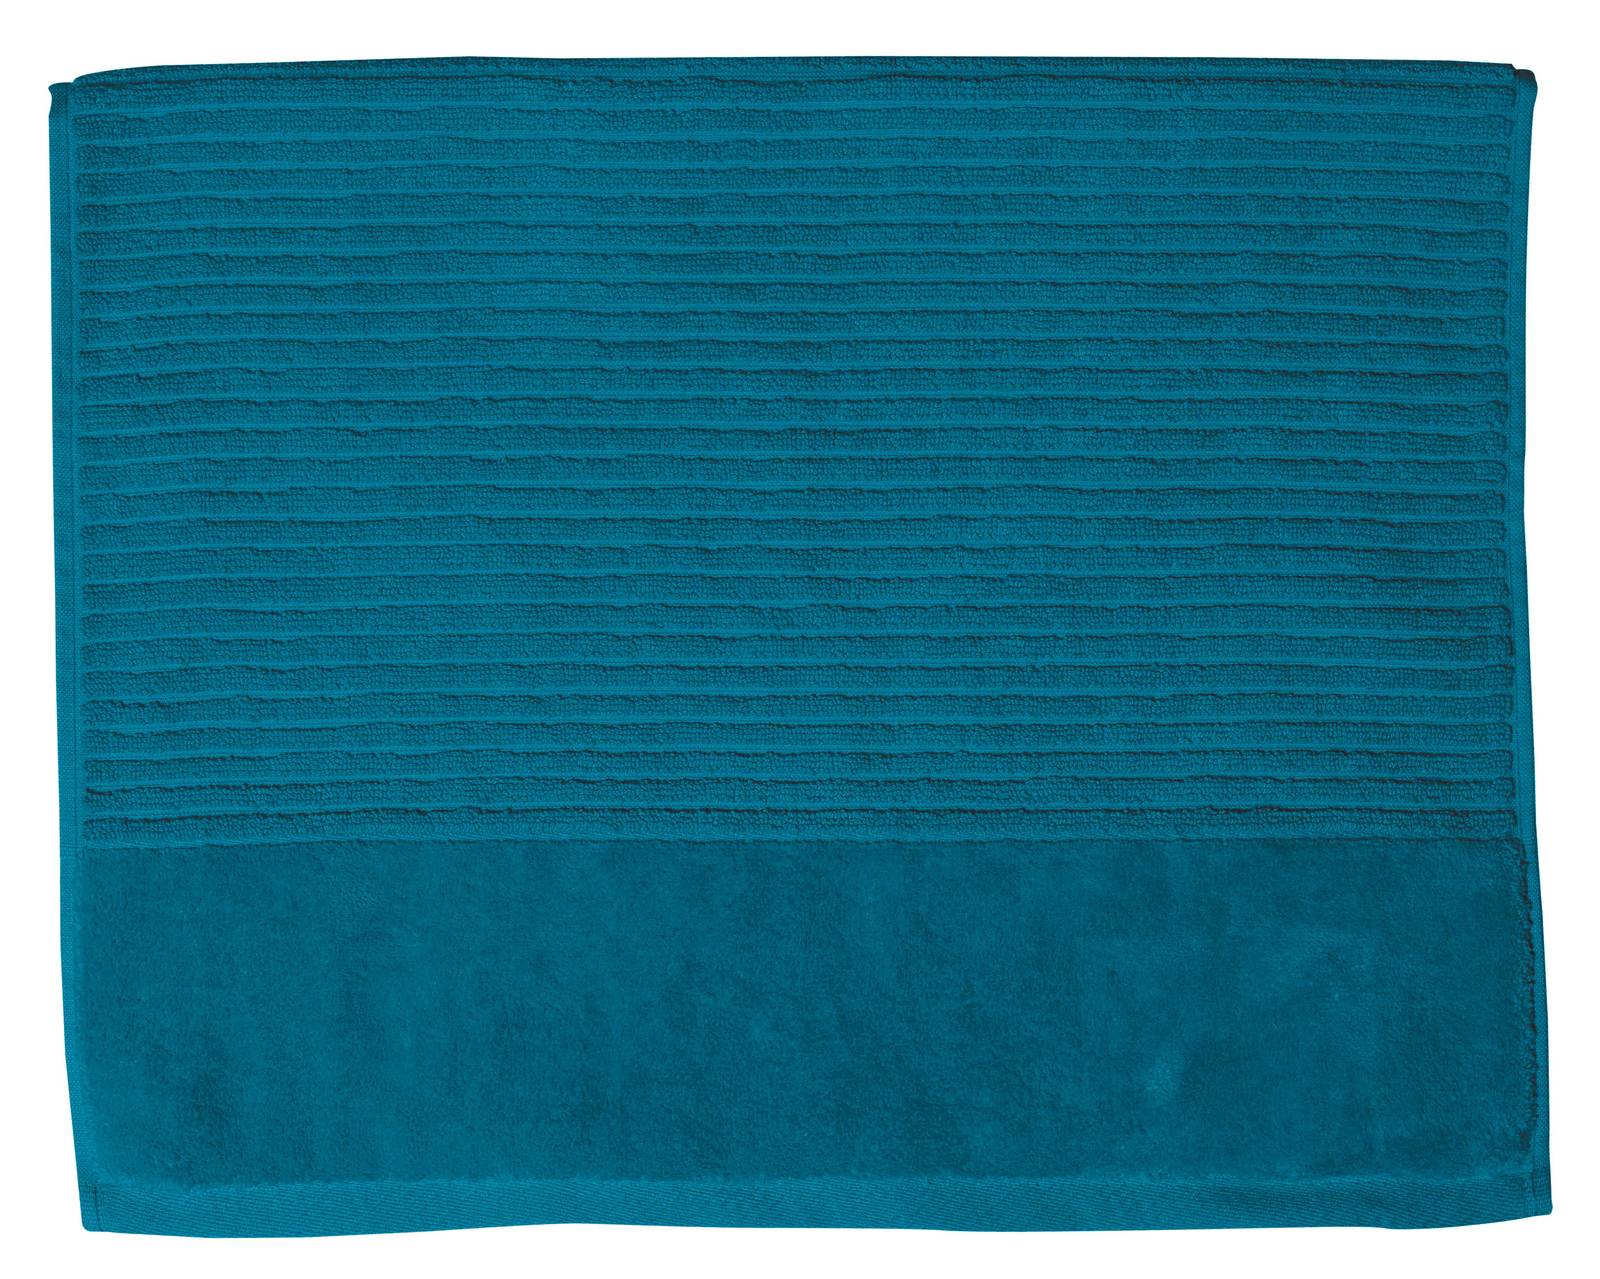 Jenny Mclean Royal Excellency Bath Mats 2 ply sheared Border 1100GSM in Teal